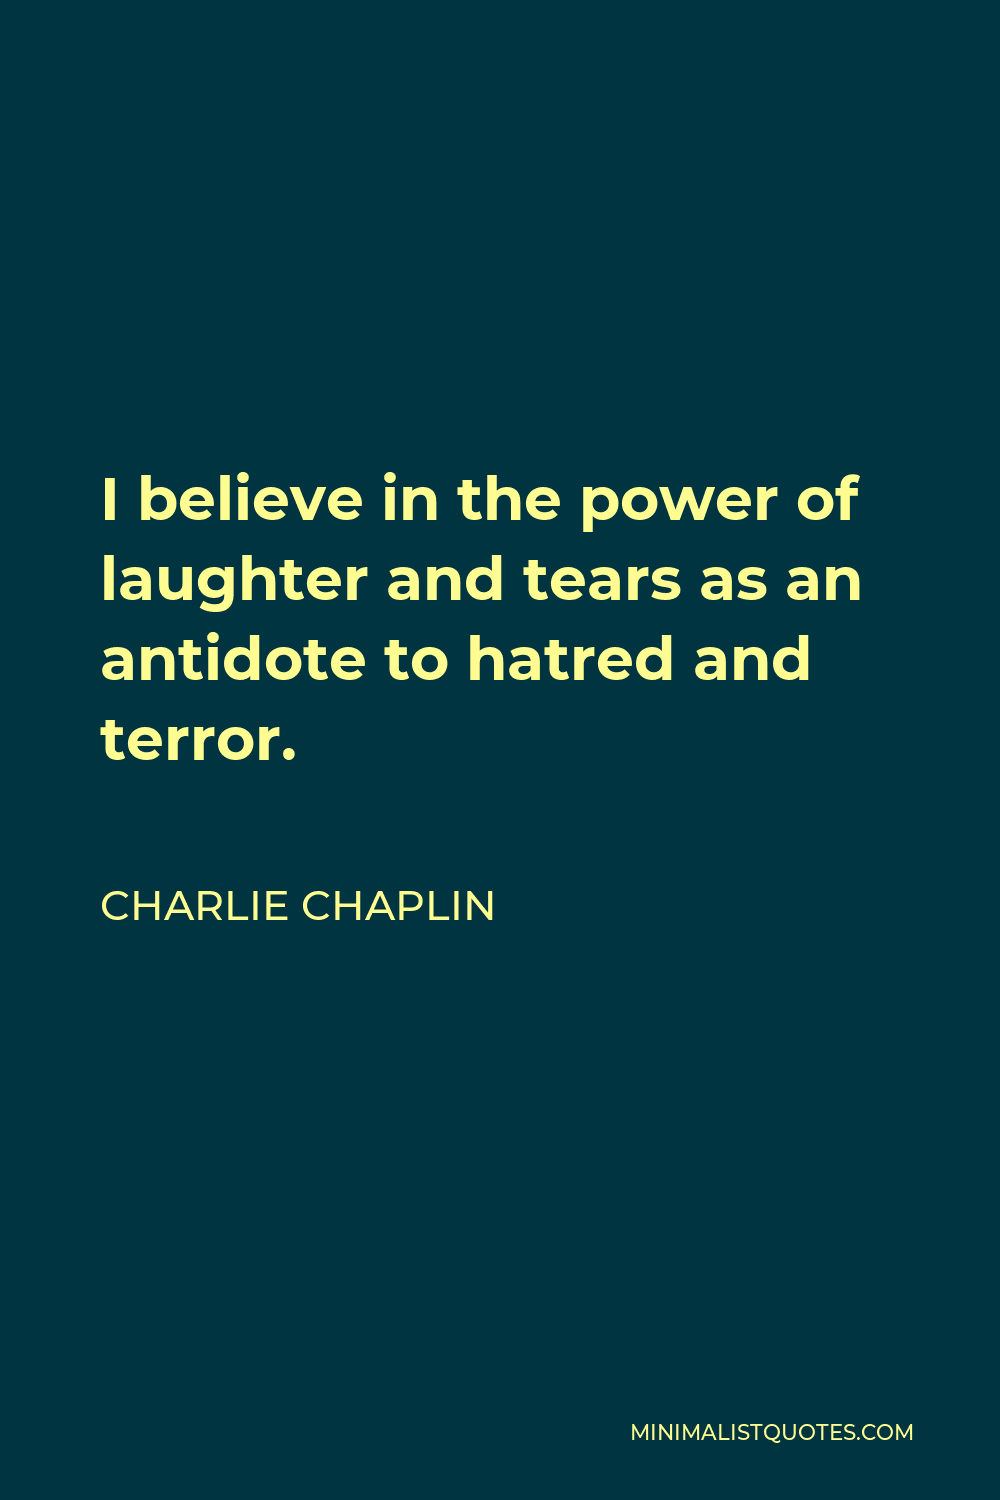 Charlie Chaplin Quote: I believe in the power of laughter and ...